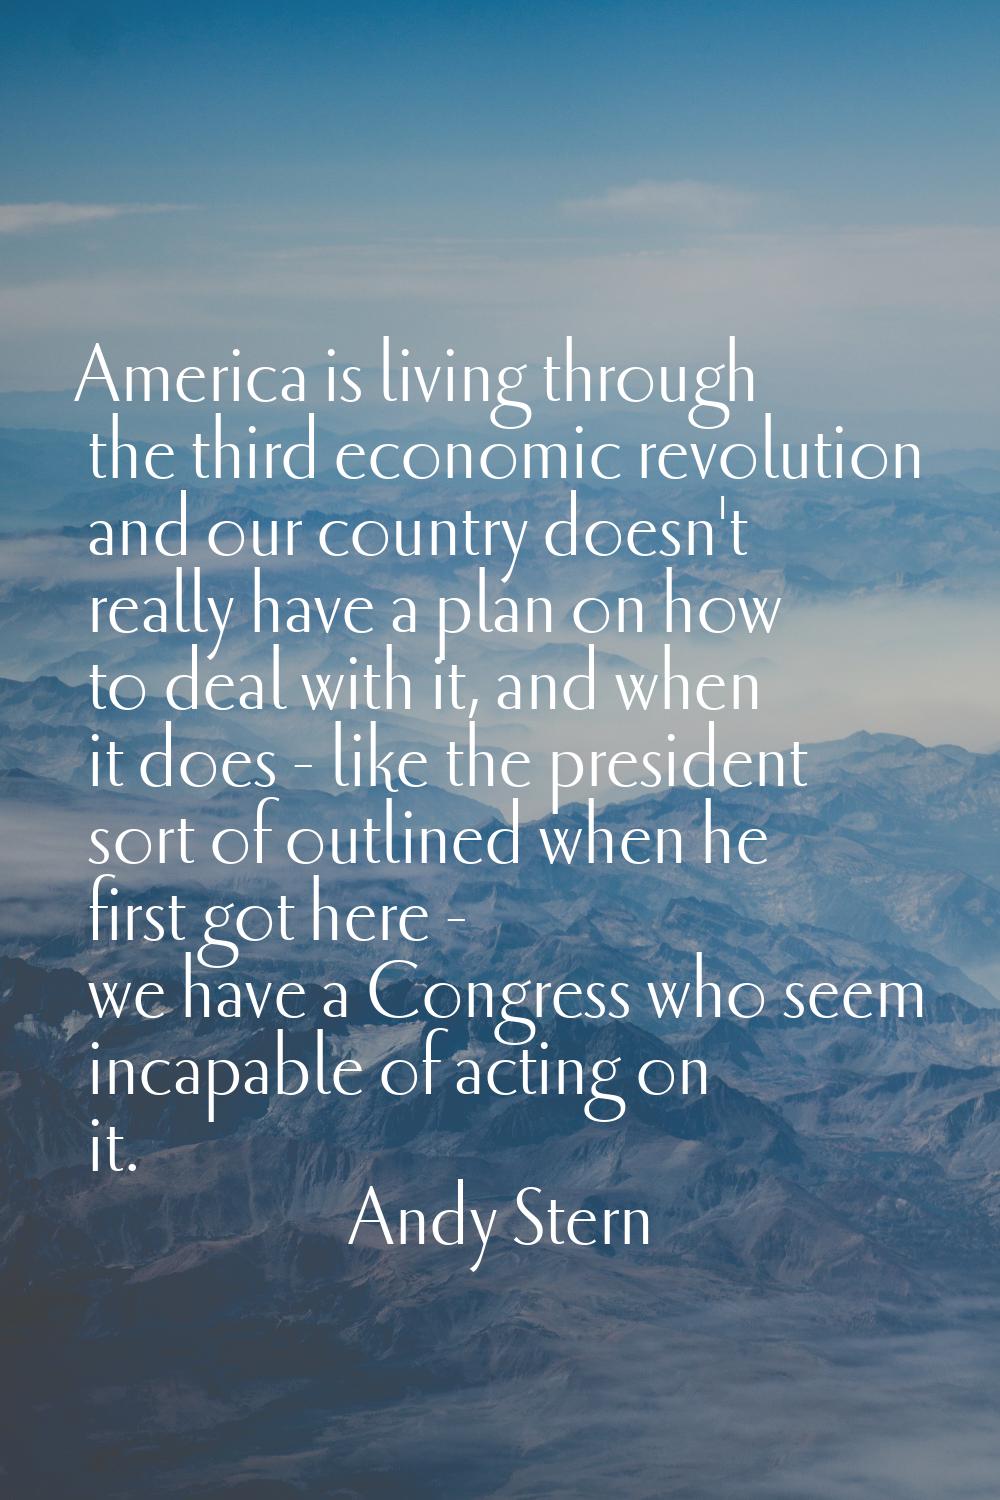 America is living through the third economic revolution and our country doesn't really have a plan 